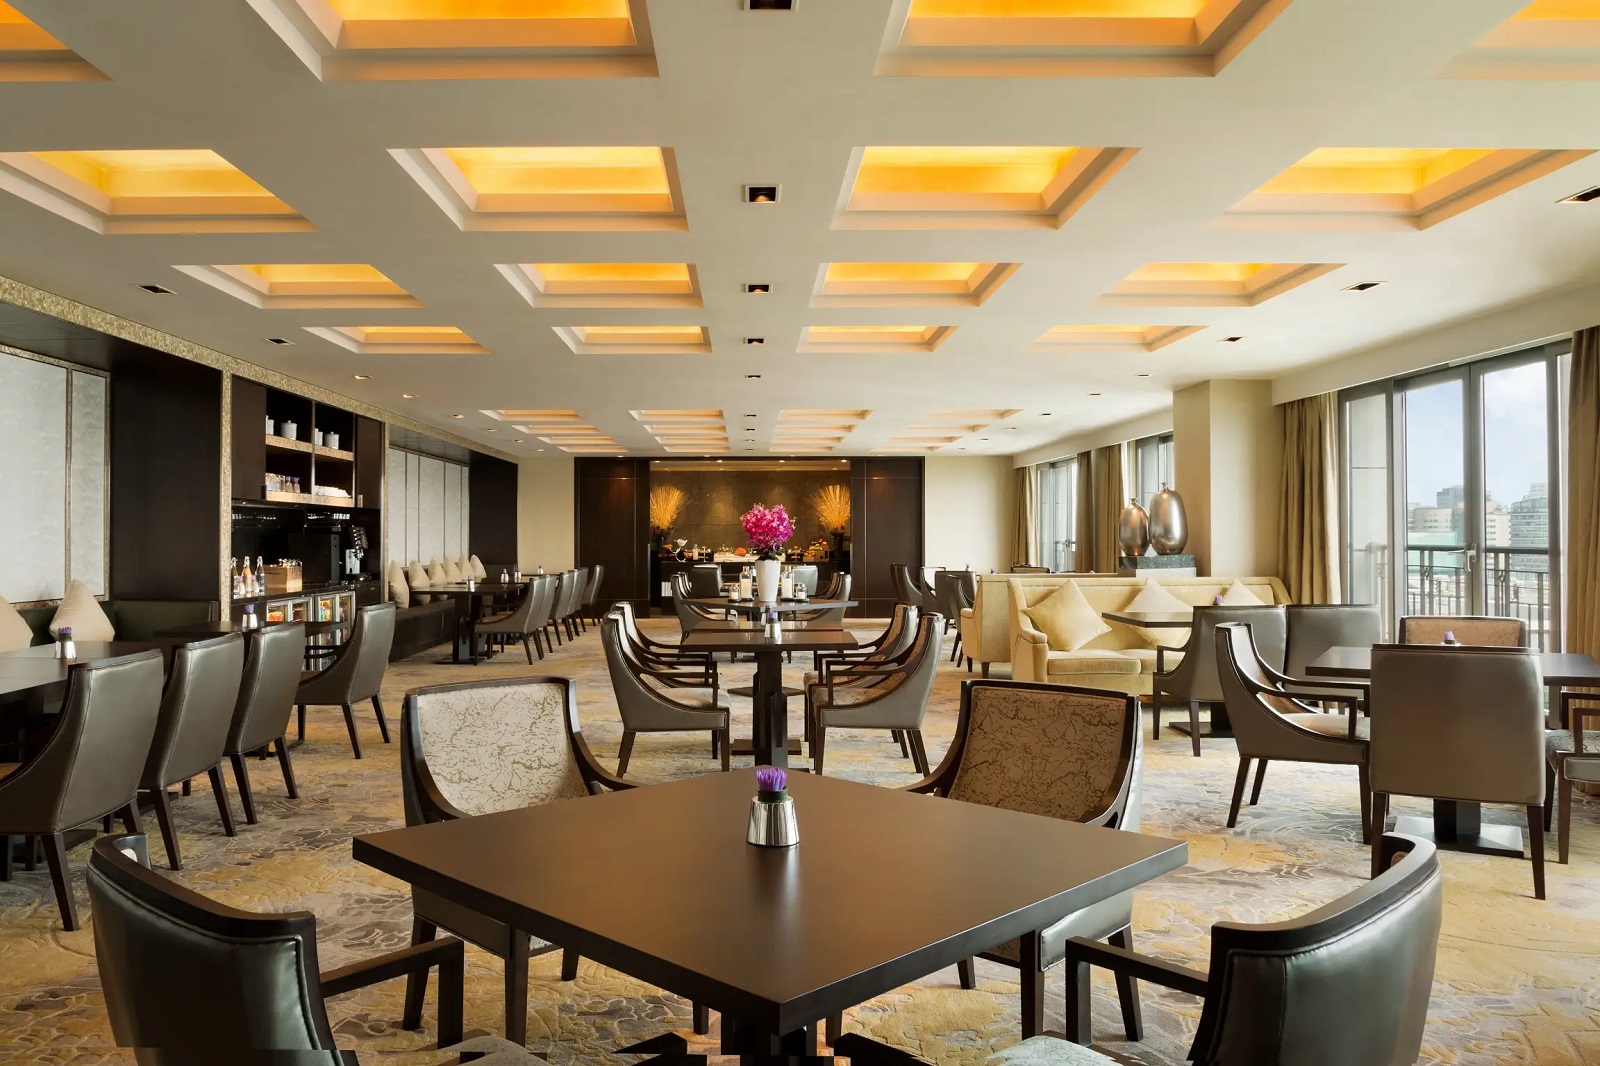 The 5 Best Hotel Executive Club Lounges in Hangzhou